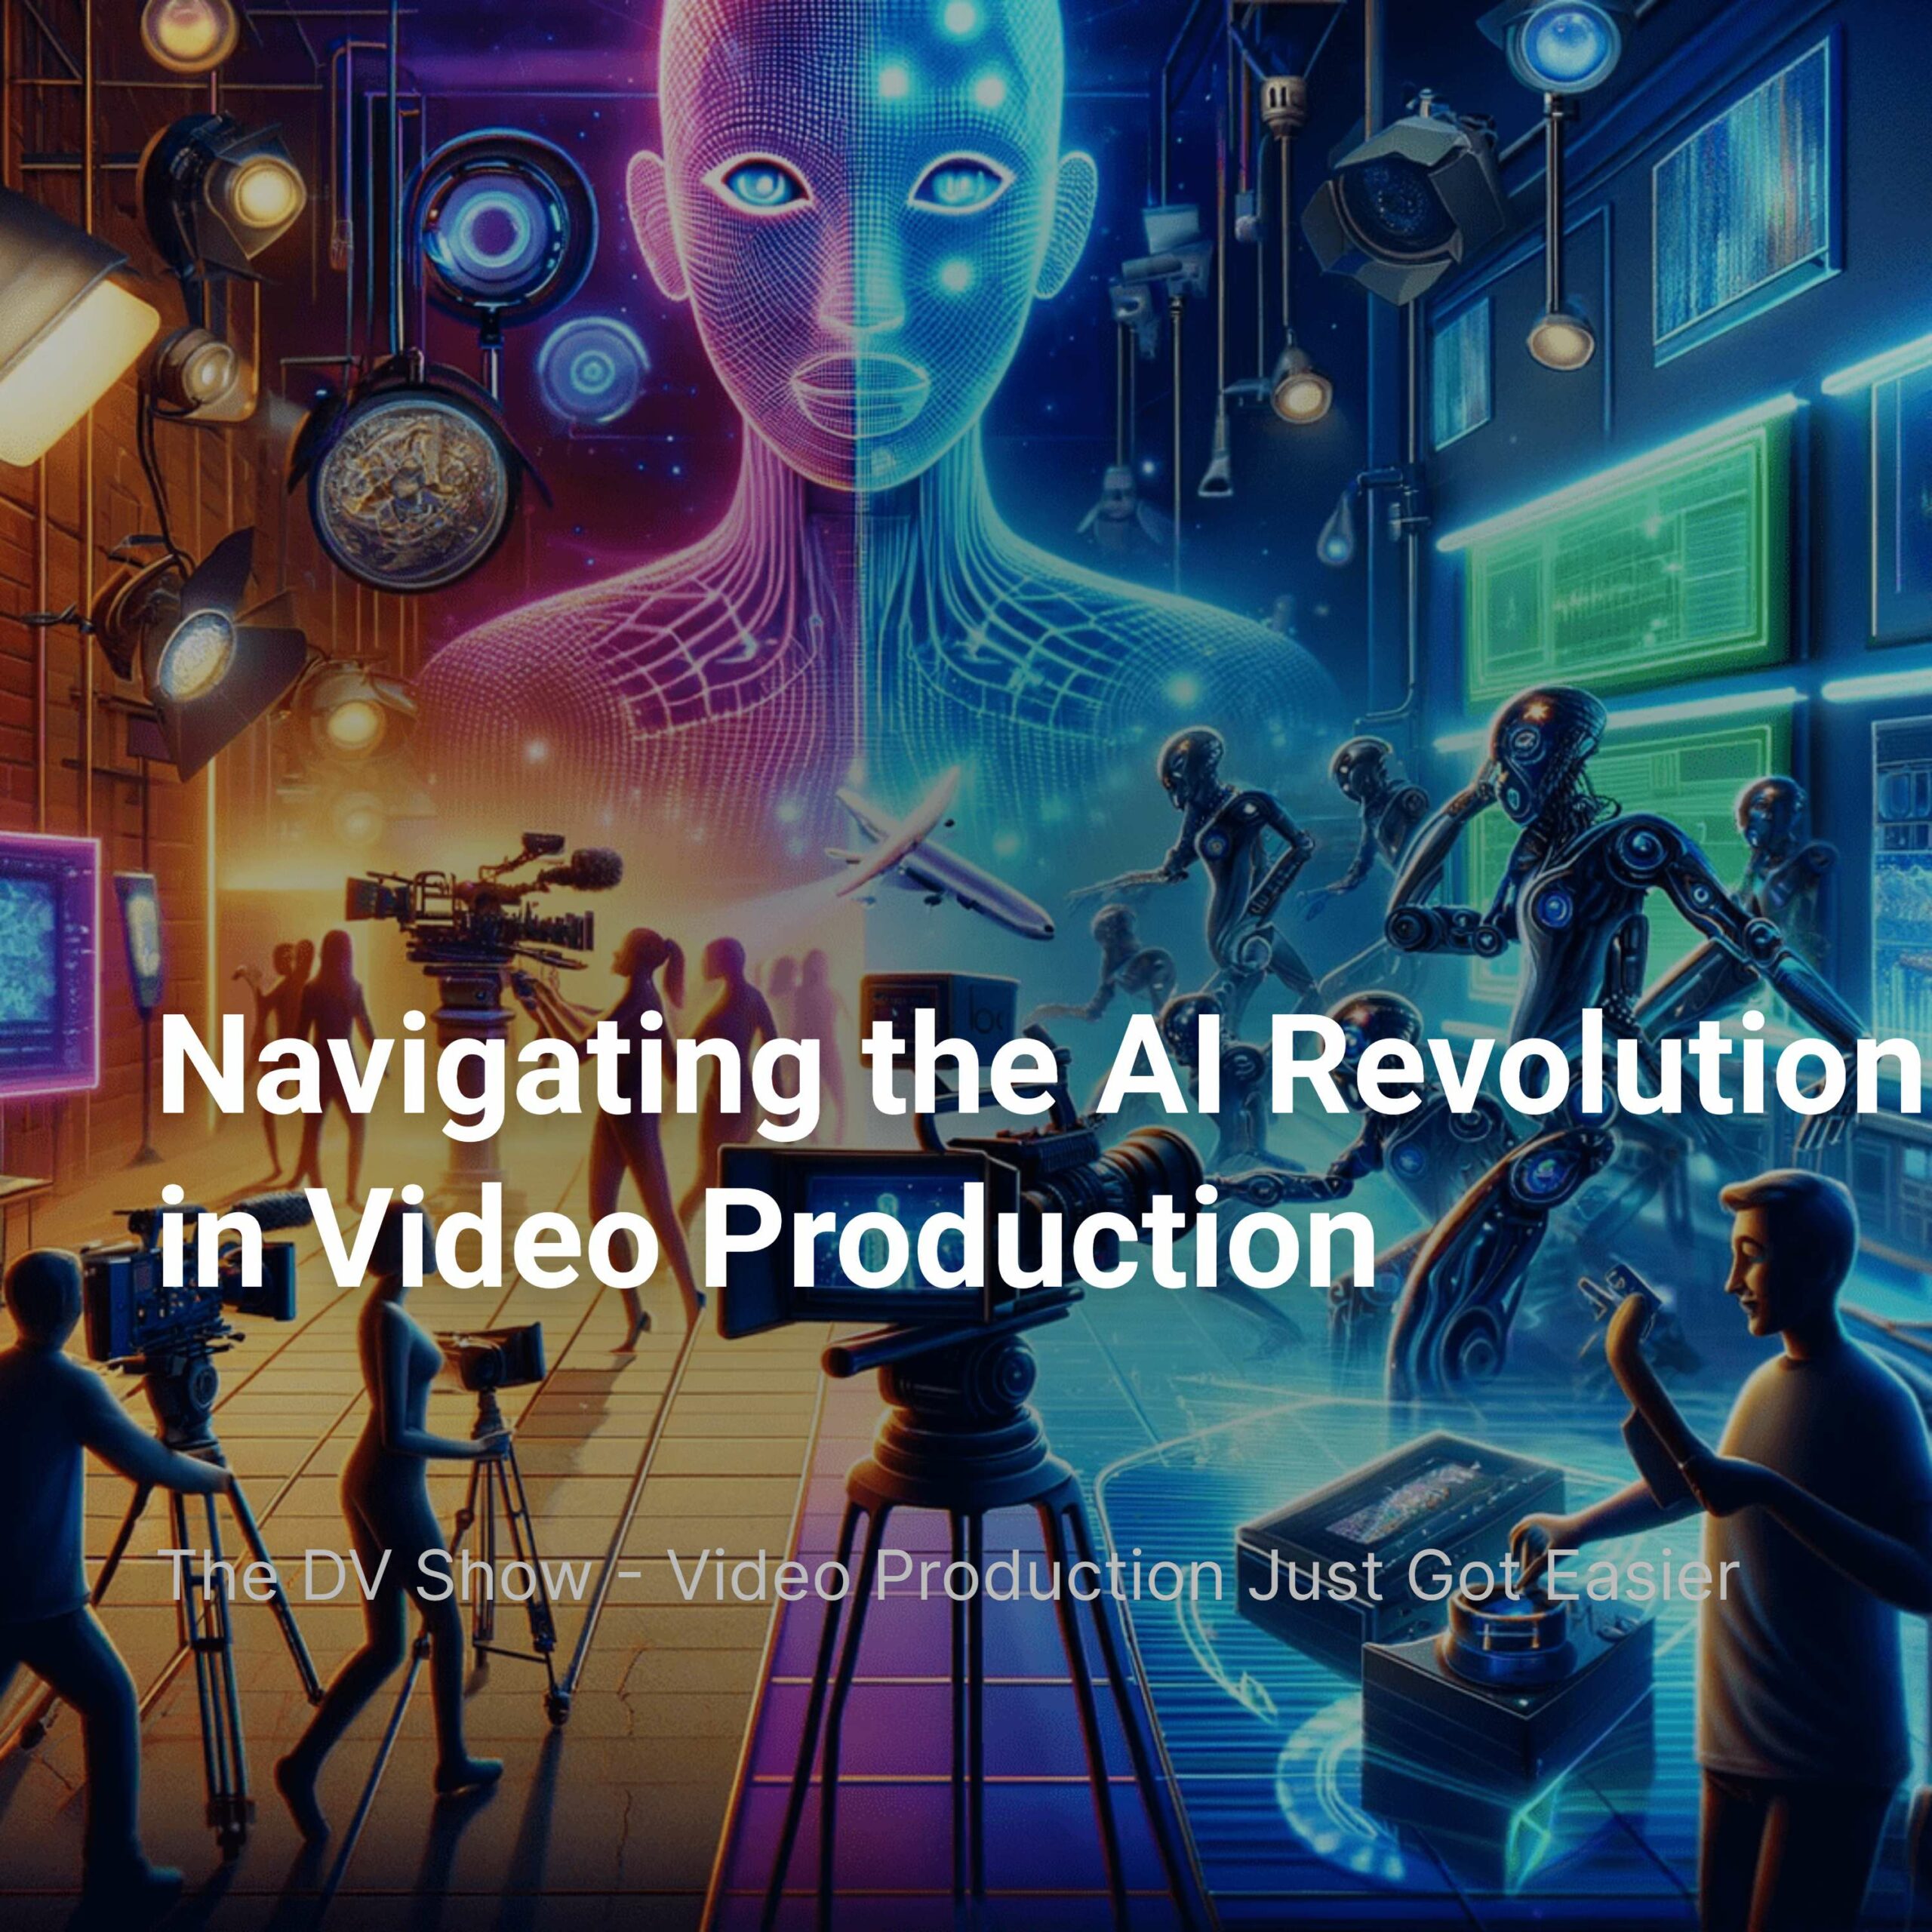 Navigating the AI Revolution in Video Production